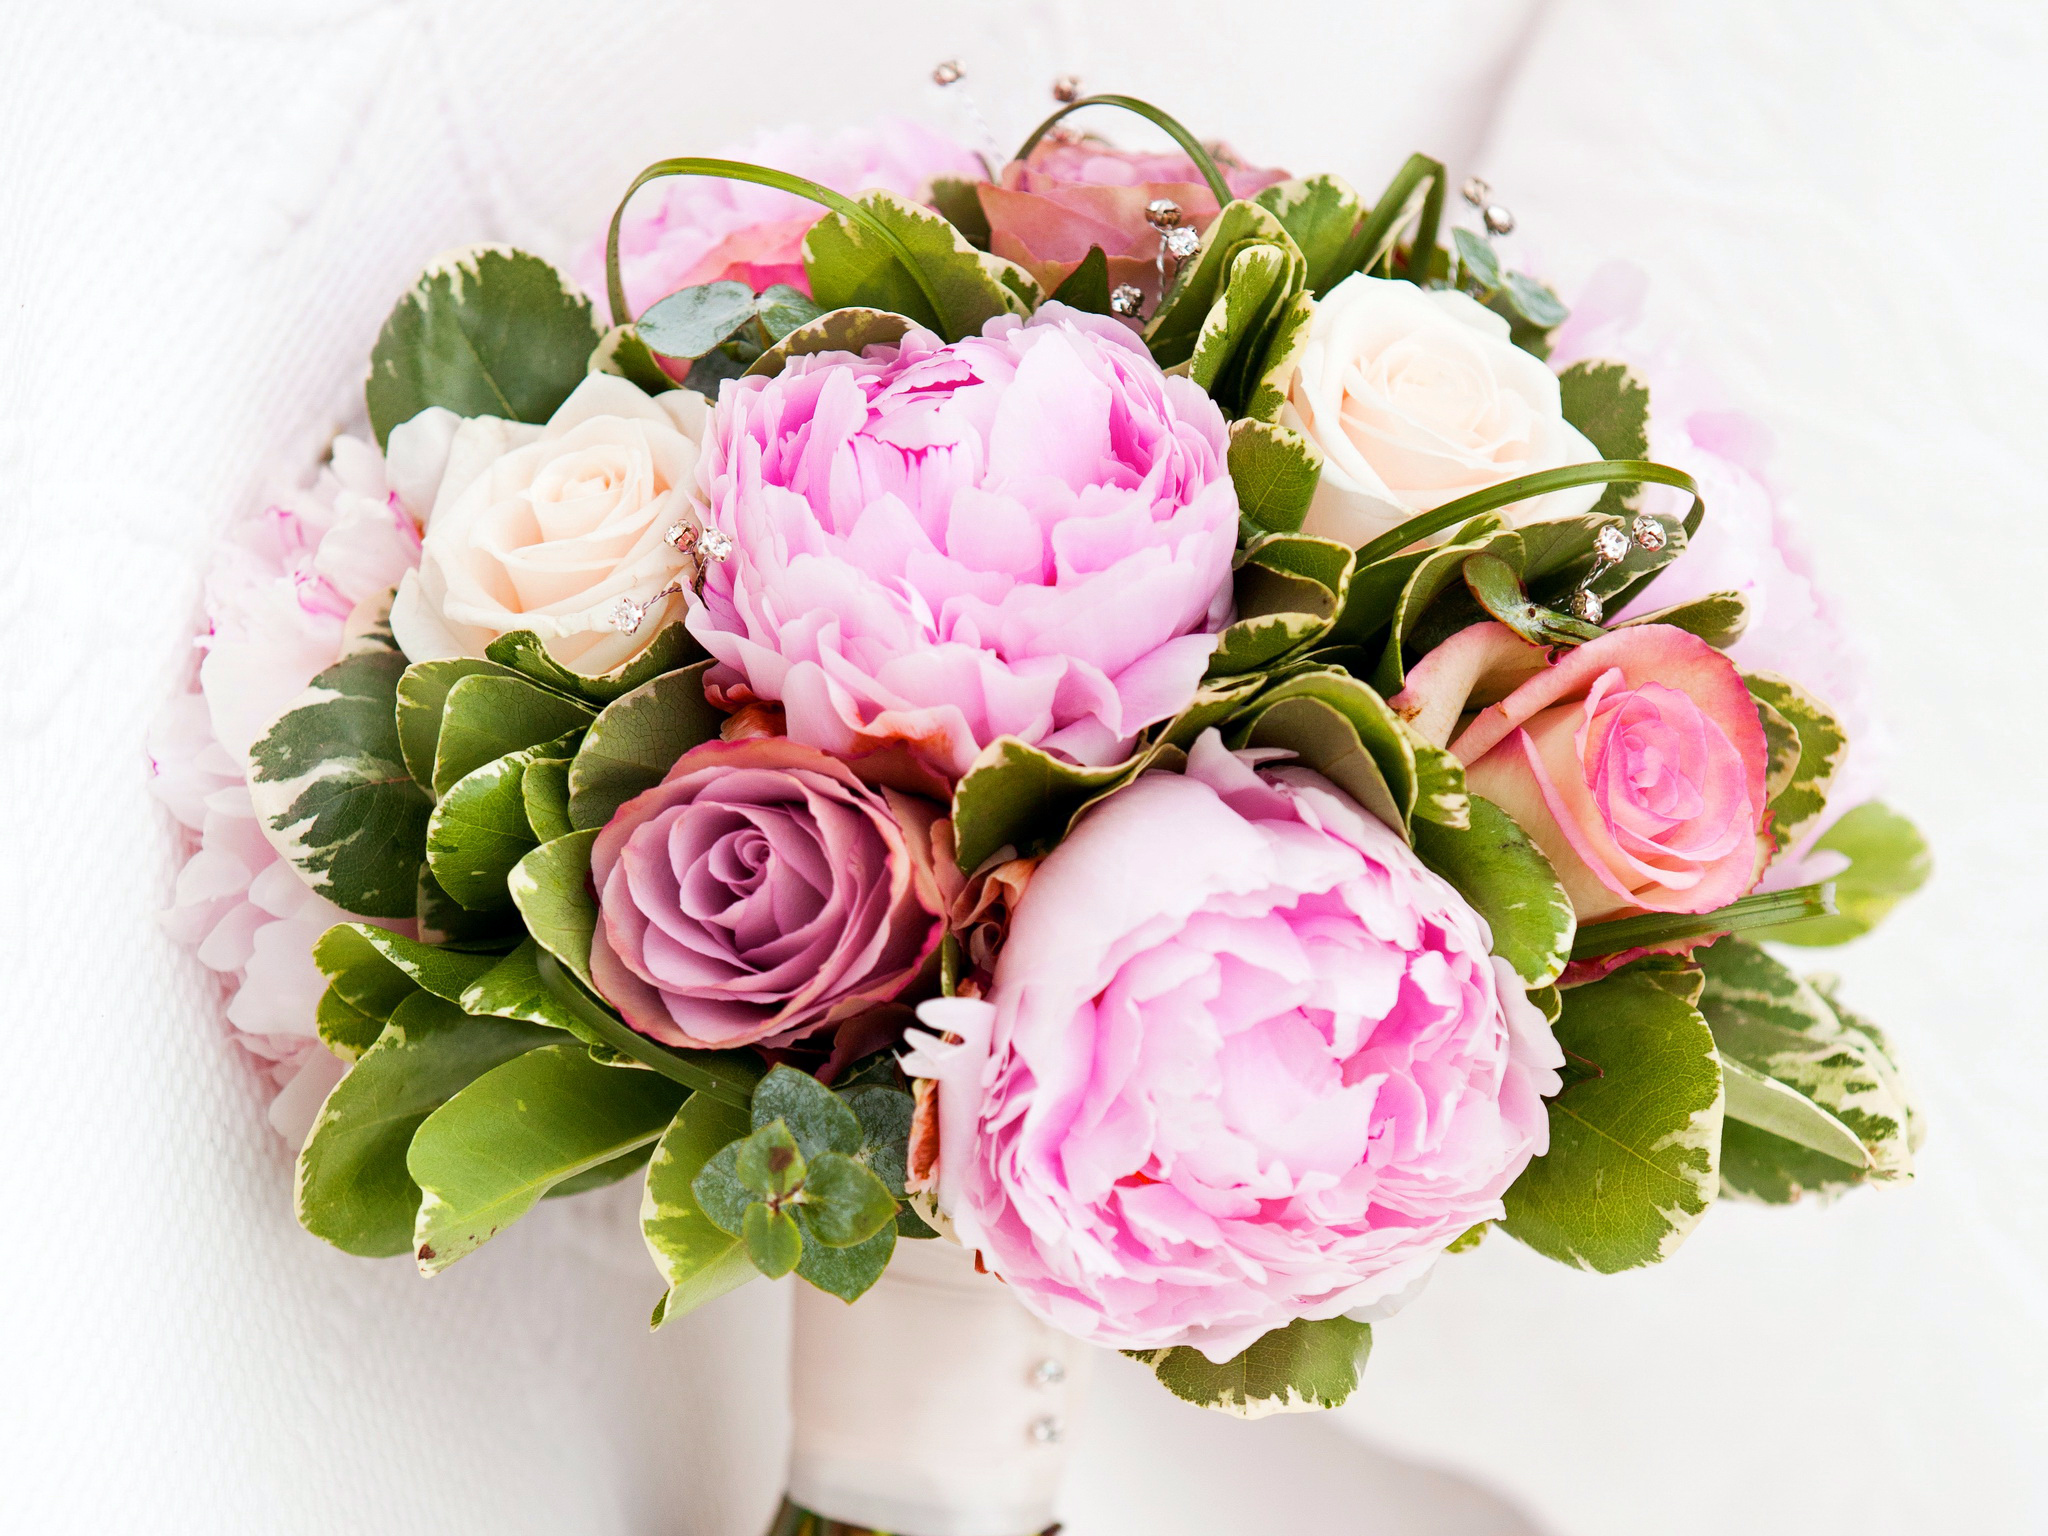 Peonies and Rose Bouquet HD Wallpaper, Background Image